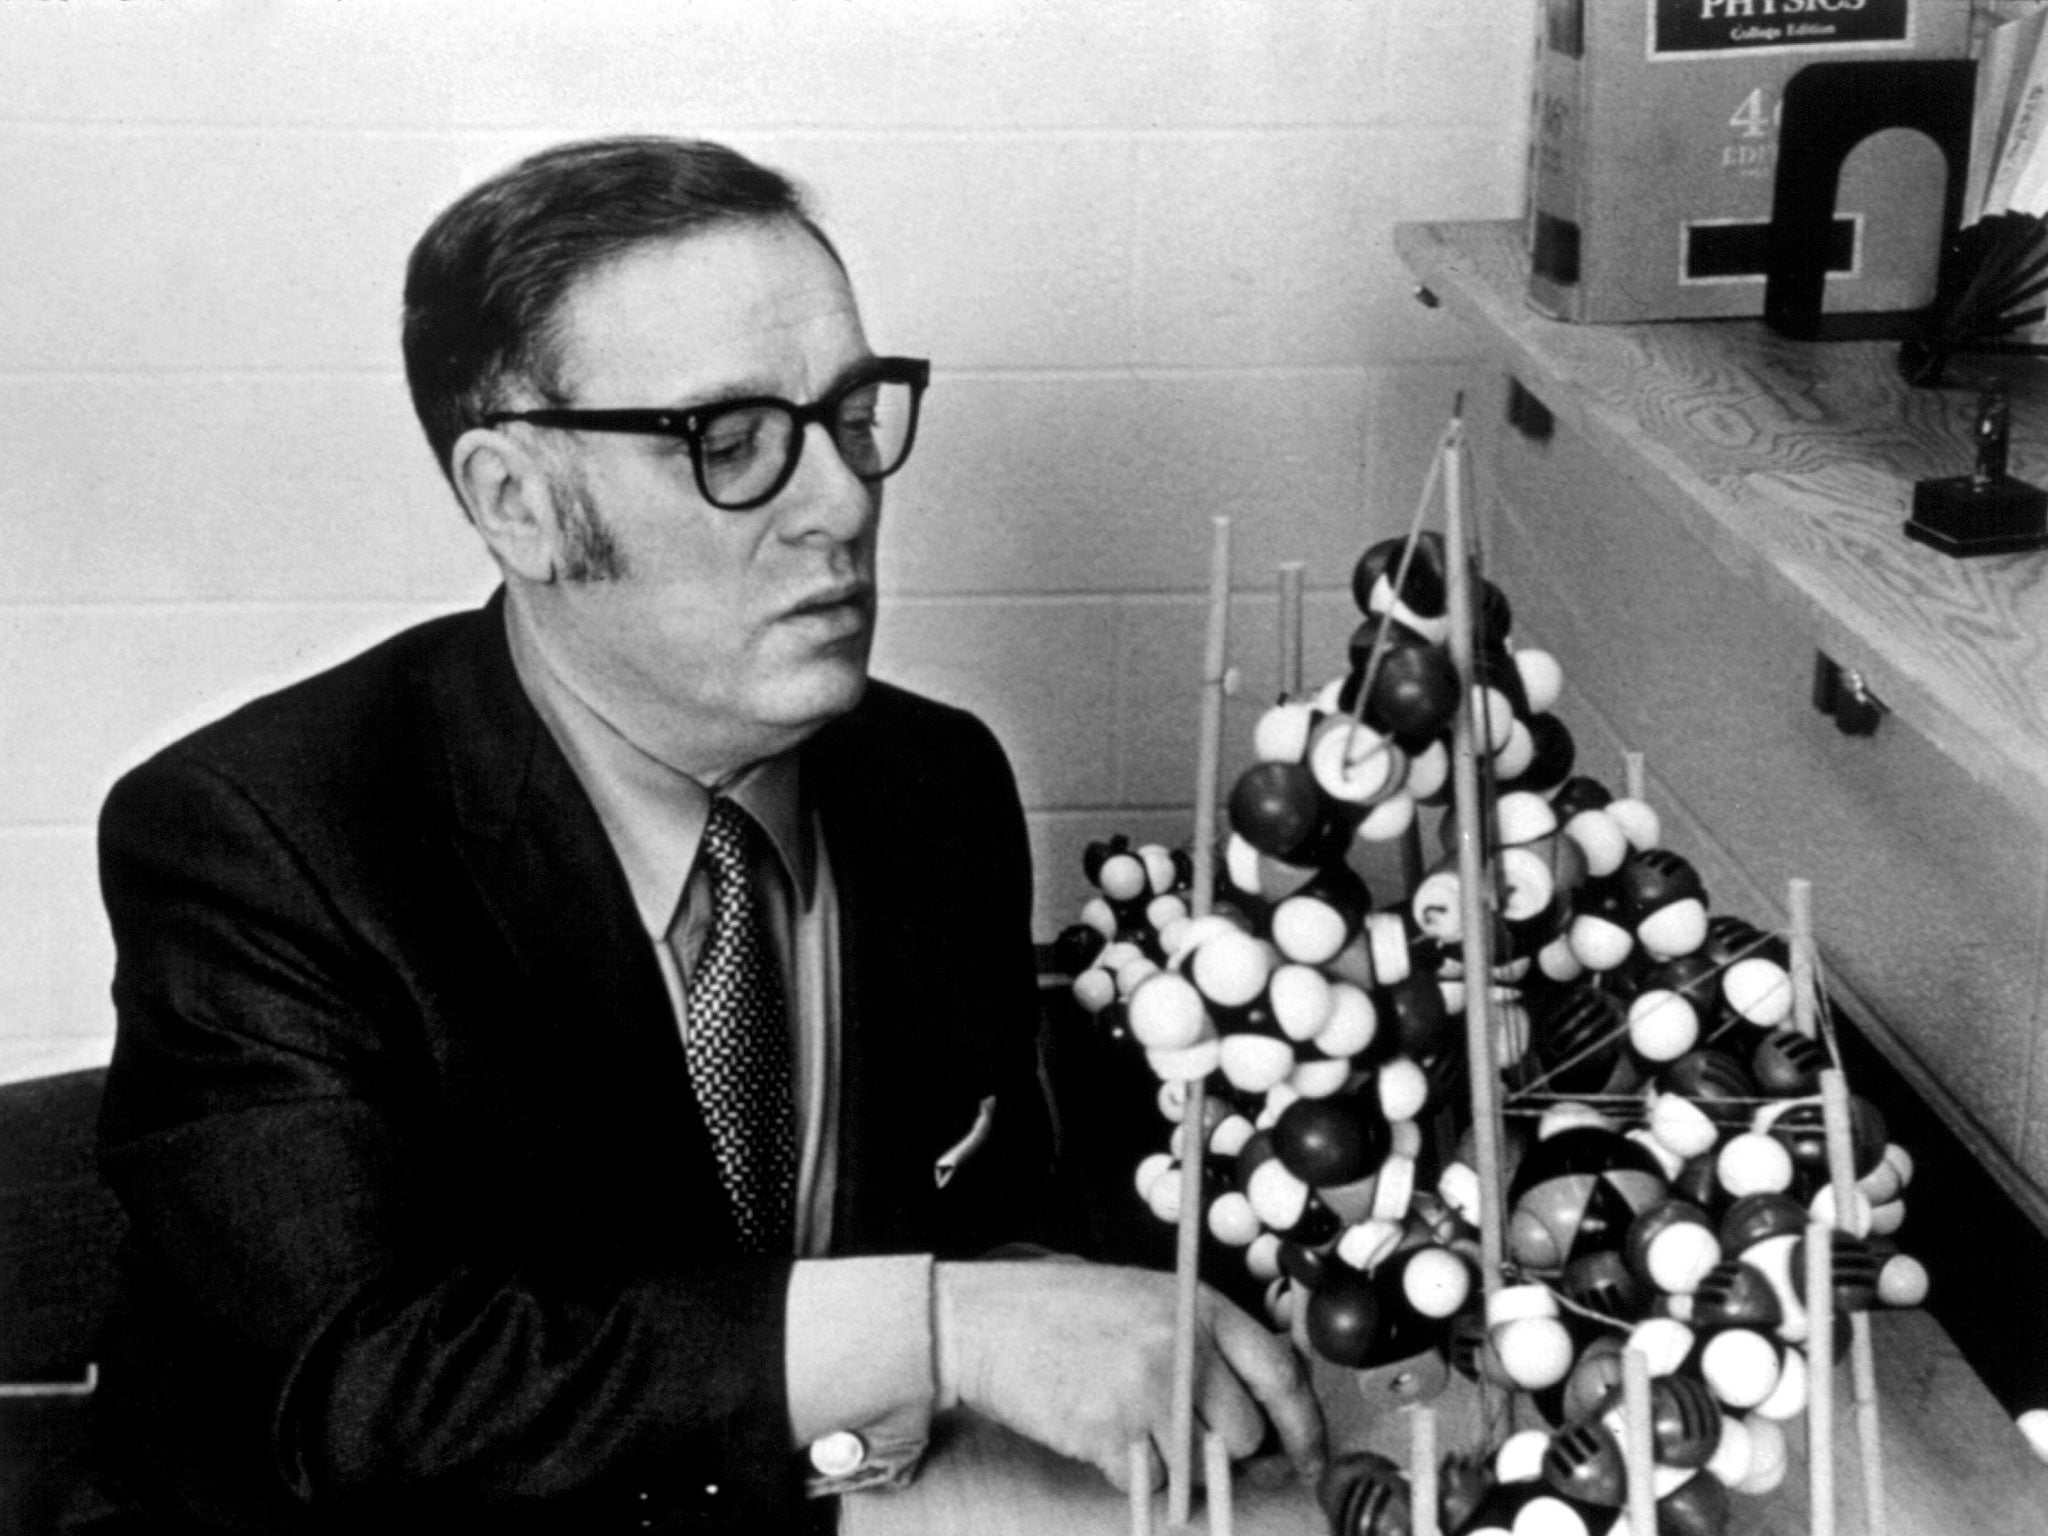 Isaac Asimov had worked as a biochemist at Boston University for more than a decade